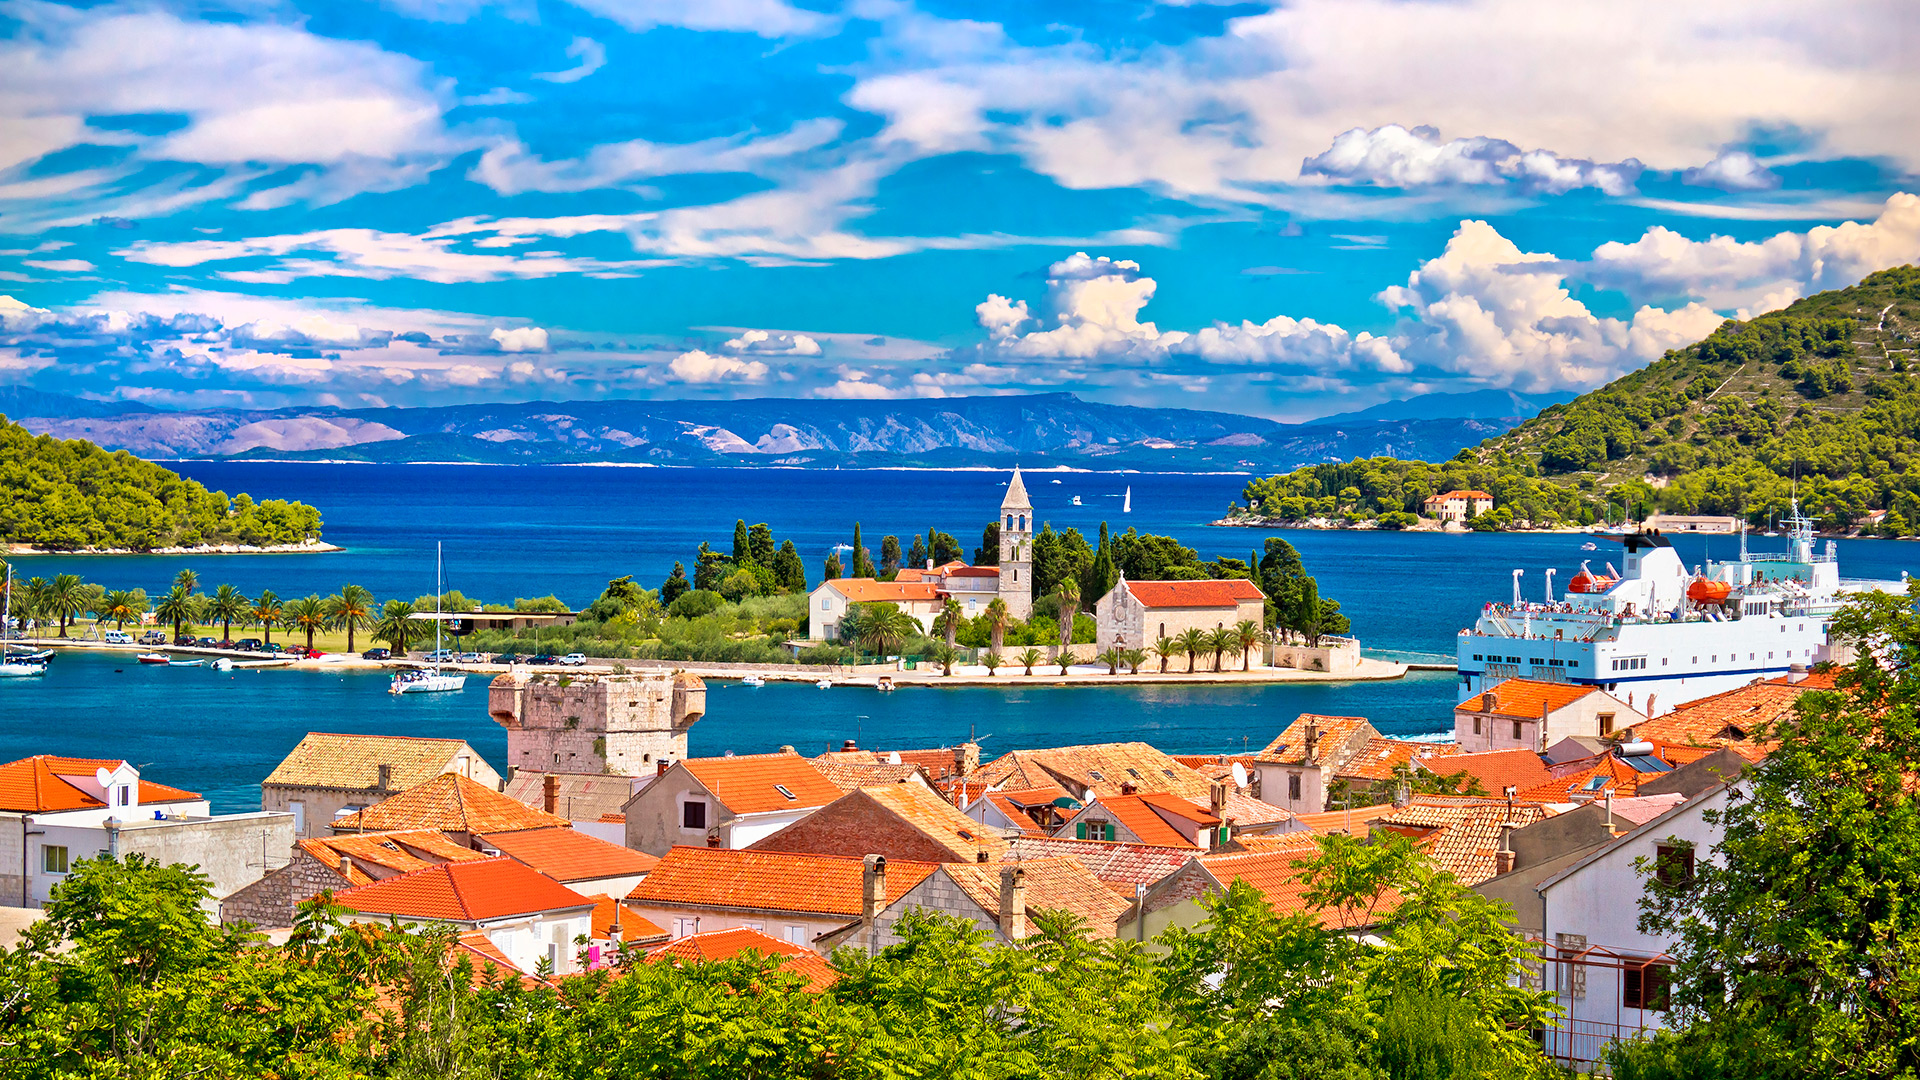 Panorama of the city with the bell tower of the Church of St. Jeronimus, Vis island, Croatia